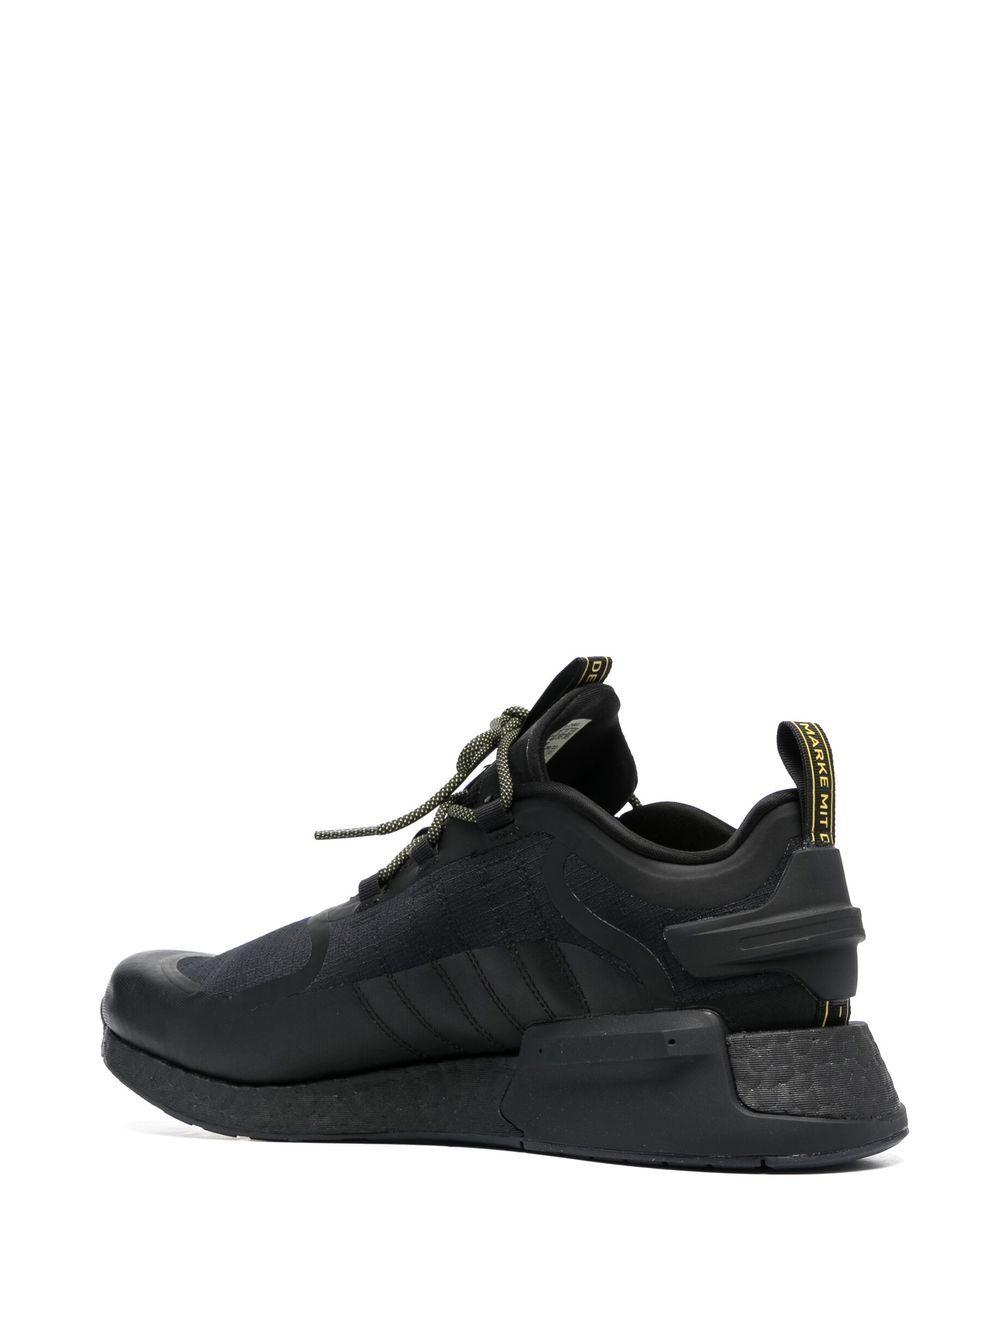 adidas Nmd_v3 Gore-tex Low-top Sneakers in Black for Men | Lyst